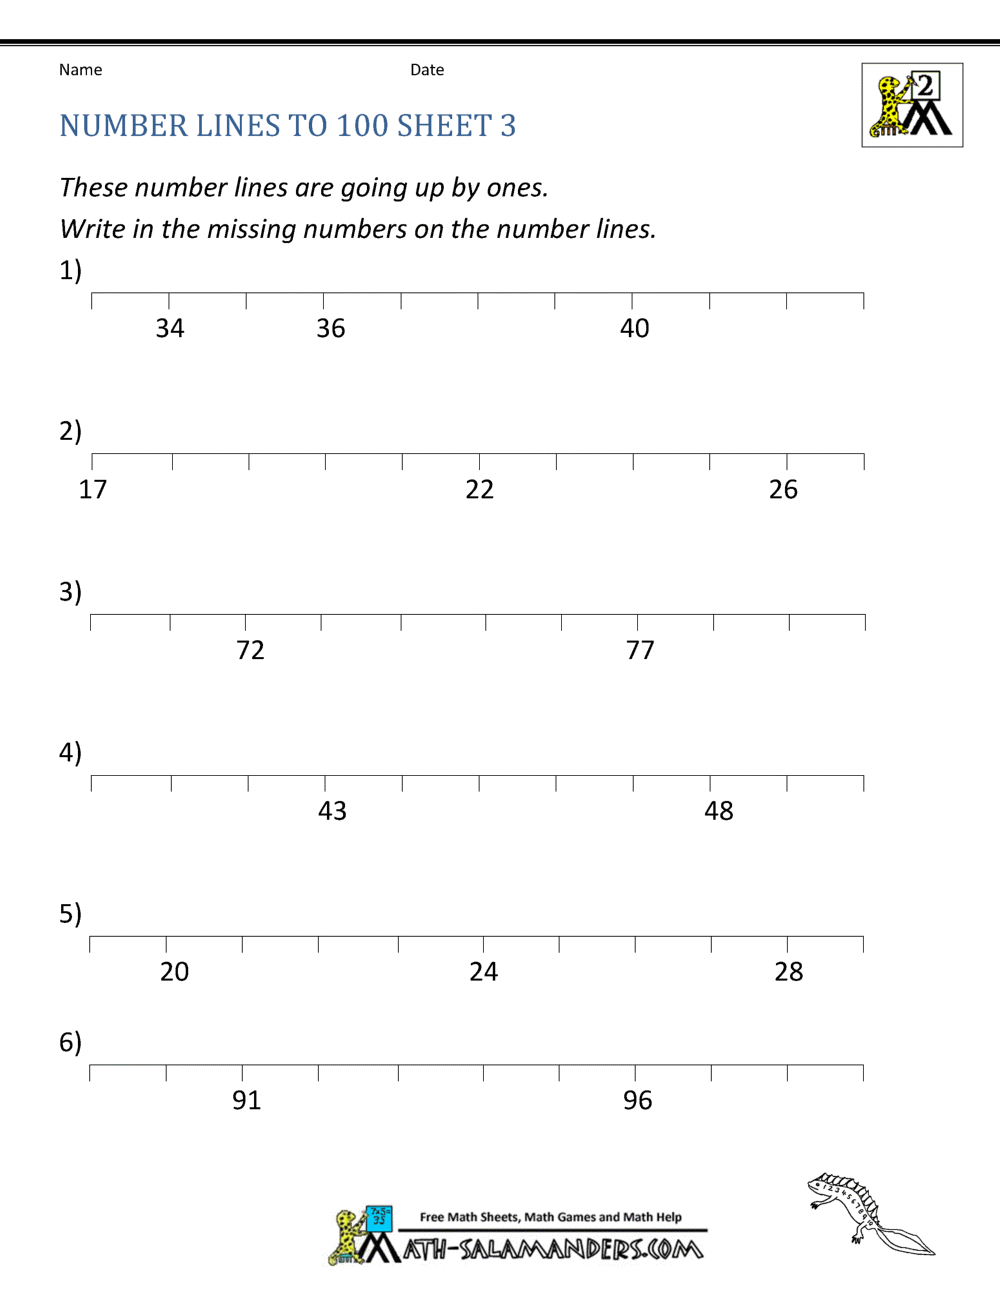 Number Lines Worksheets Counting By 1s And Halves